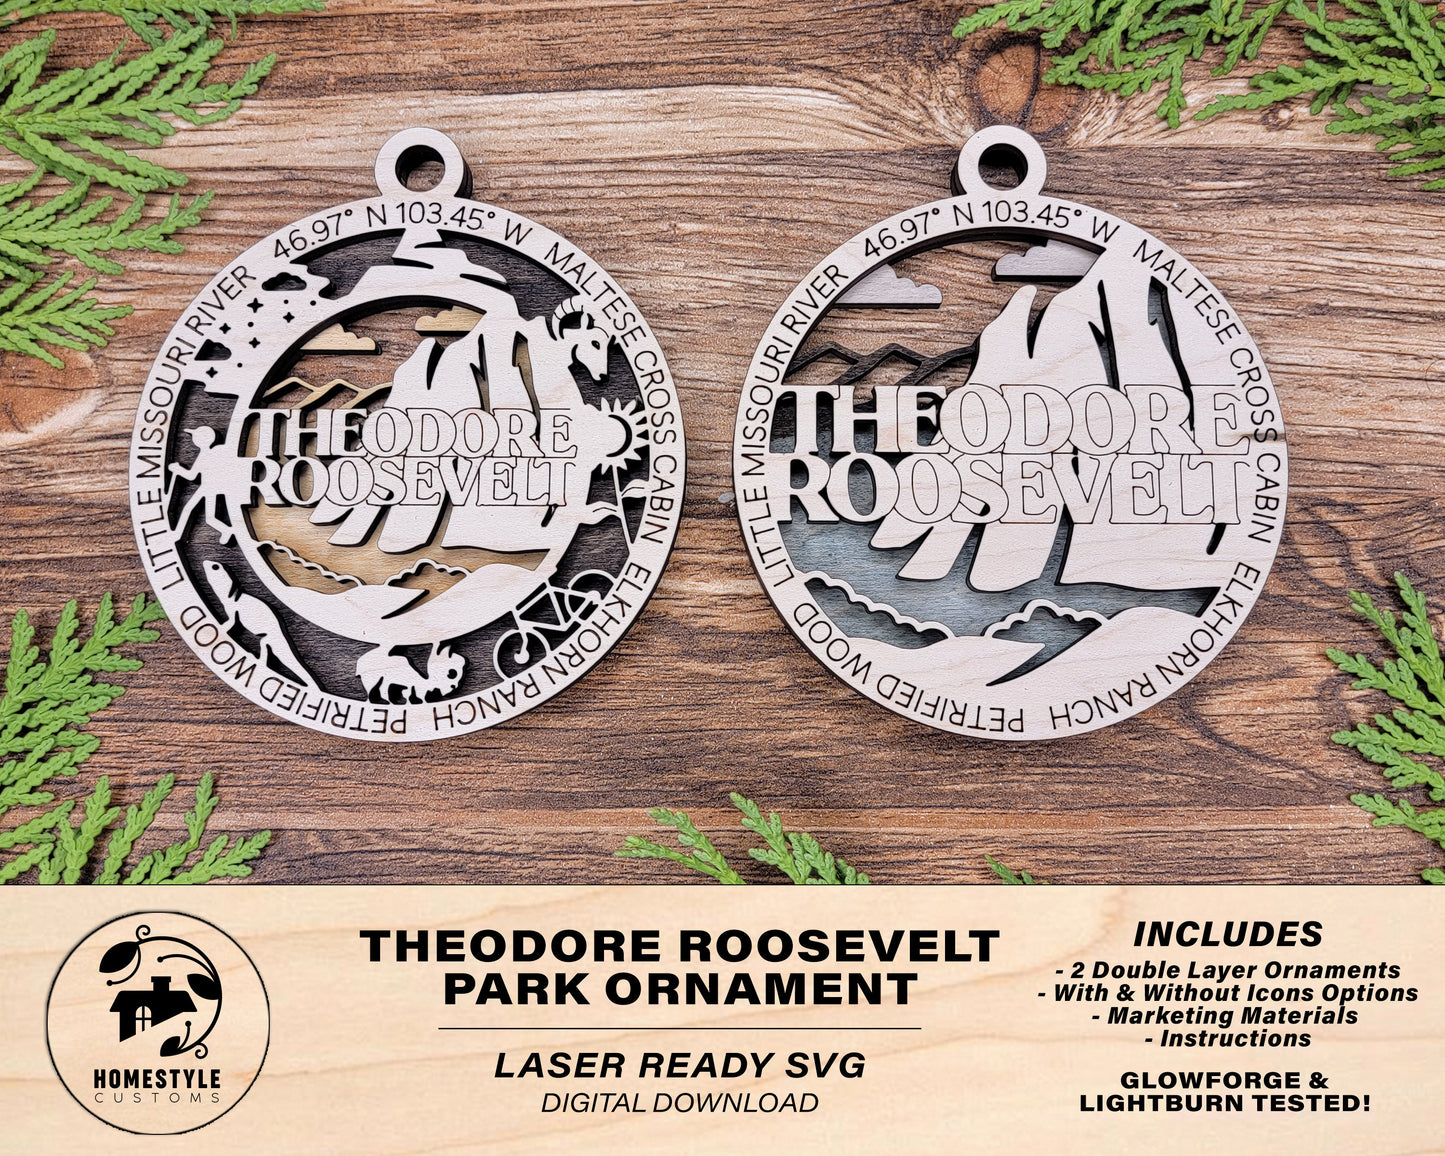 Theodore Roosevelt Park Ornament - Includes 2 Ornaments - Laser Design SVG, PDF, AI File Download - Tested On Glowforge and LightBurn